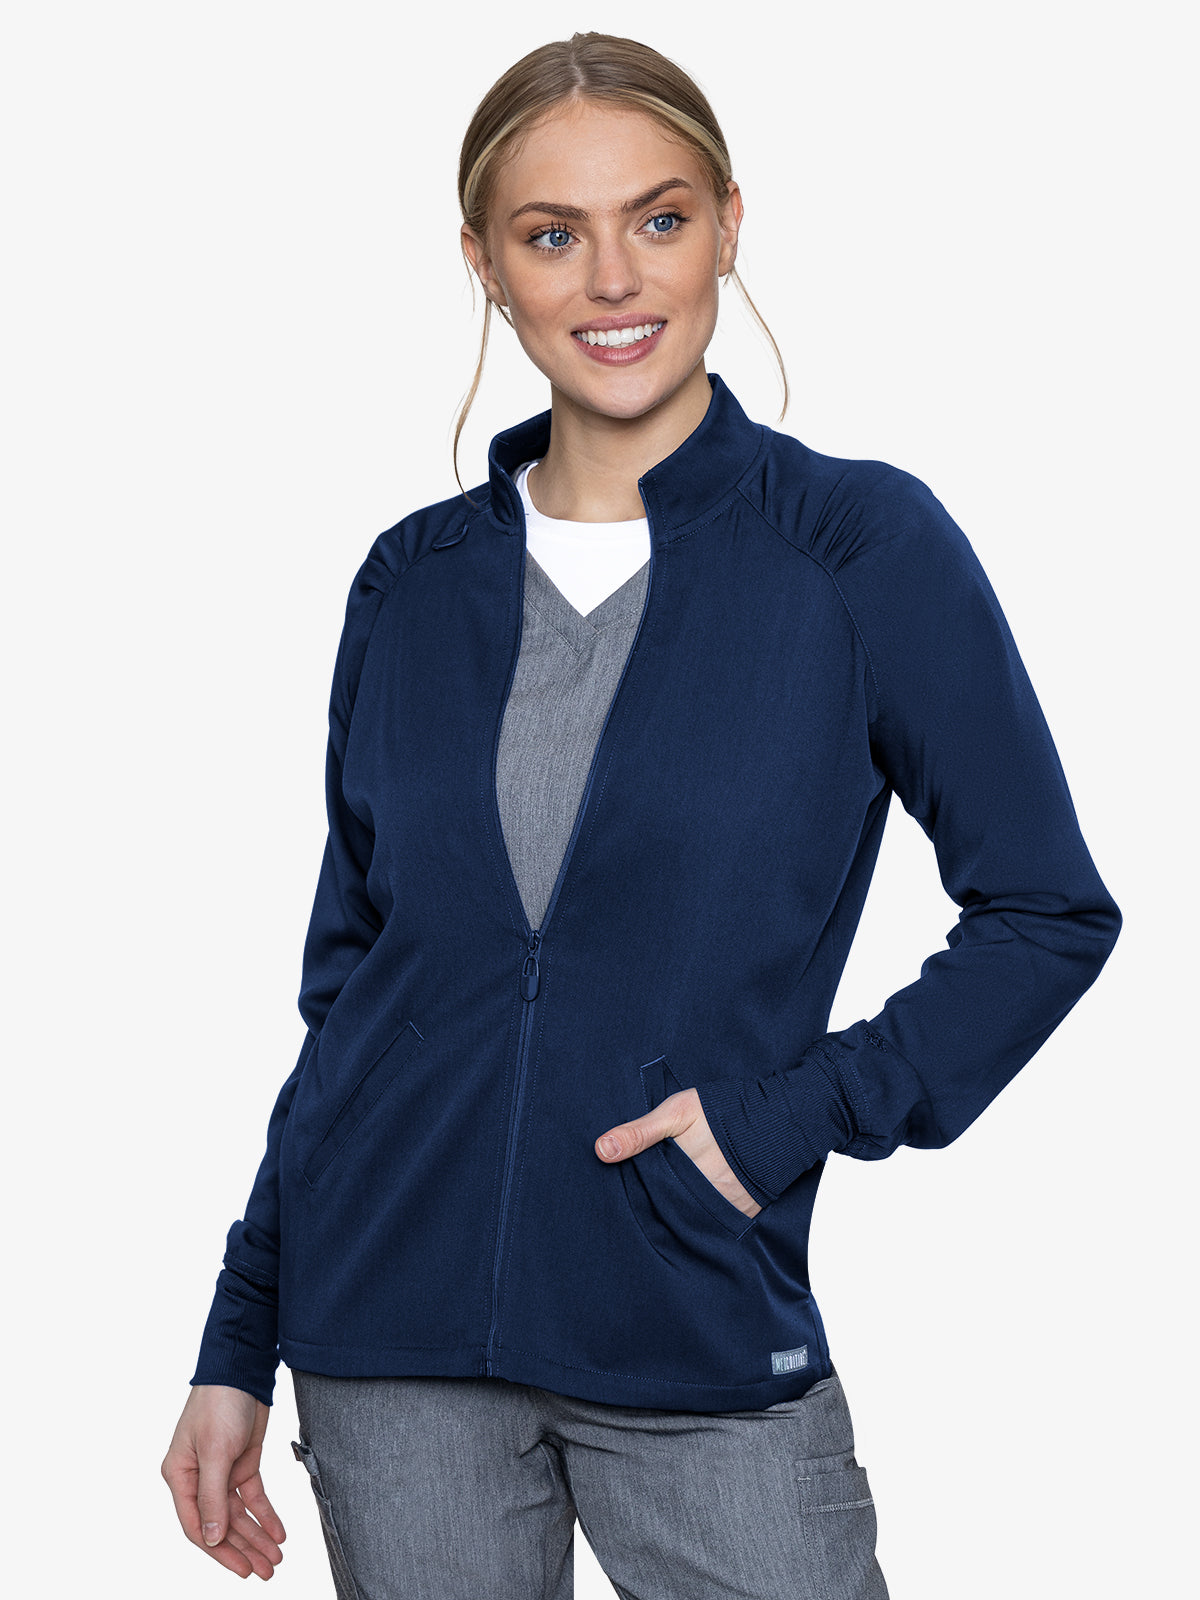 Med Couture Touch 7660 Women's Raglan Warmup Zip Jacket Navy Front